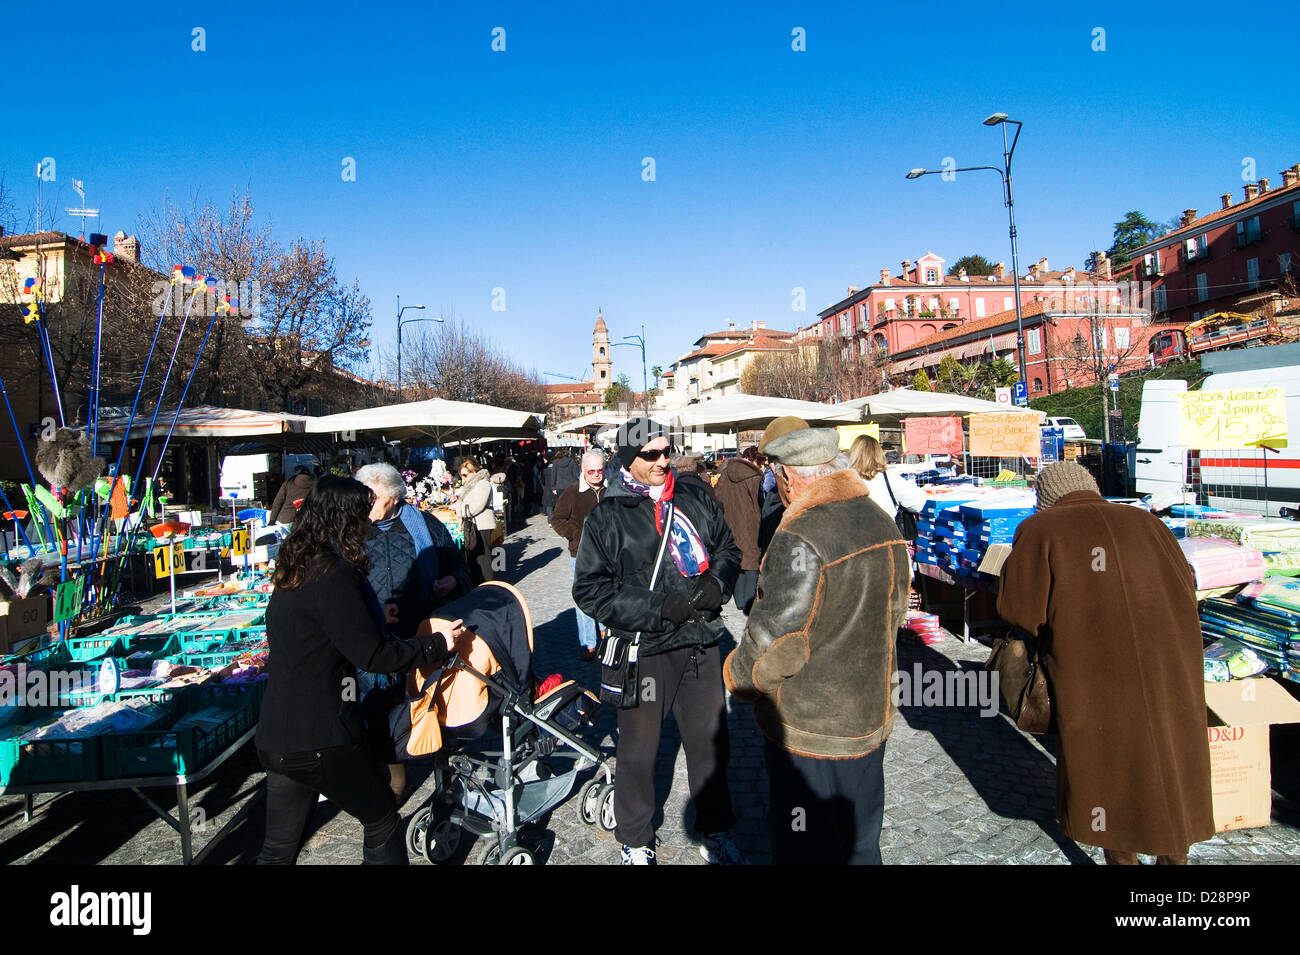 The colorful market in the center of Bra, Piedmont, Italy. Stock Photo